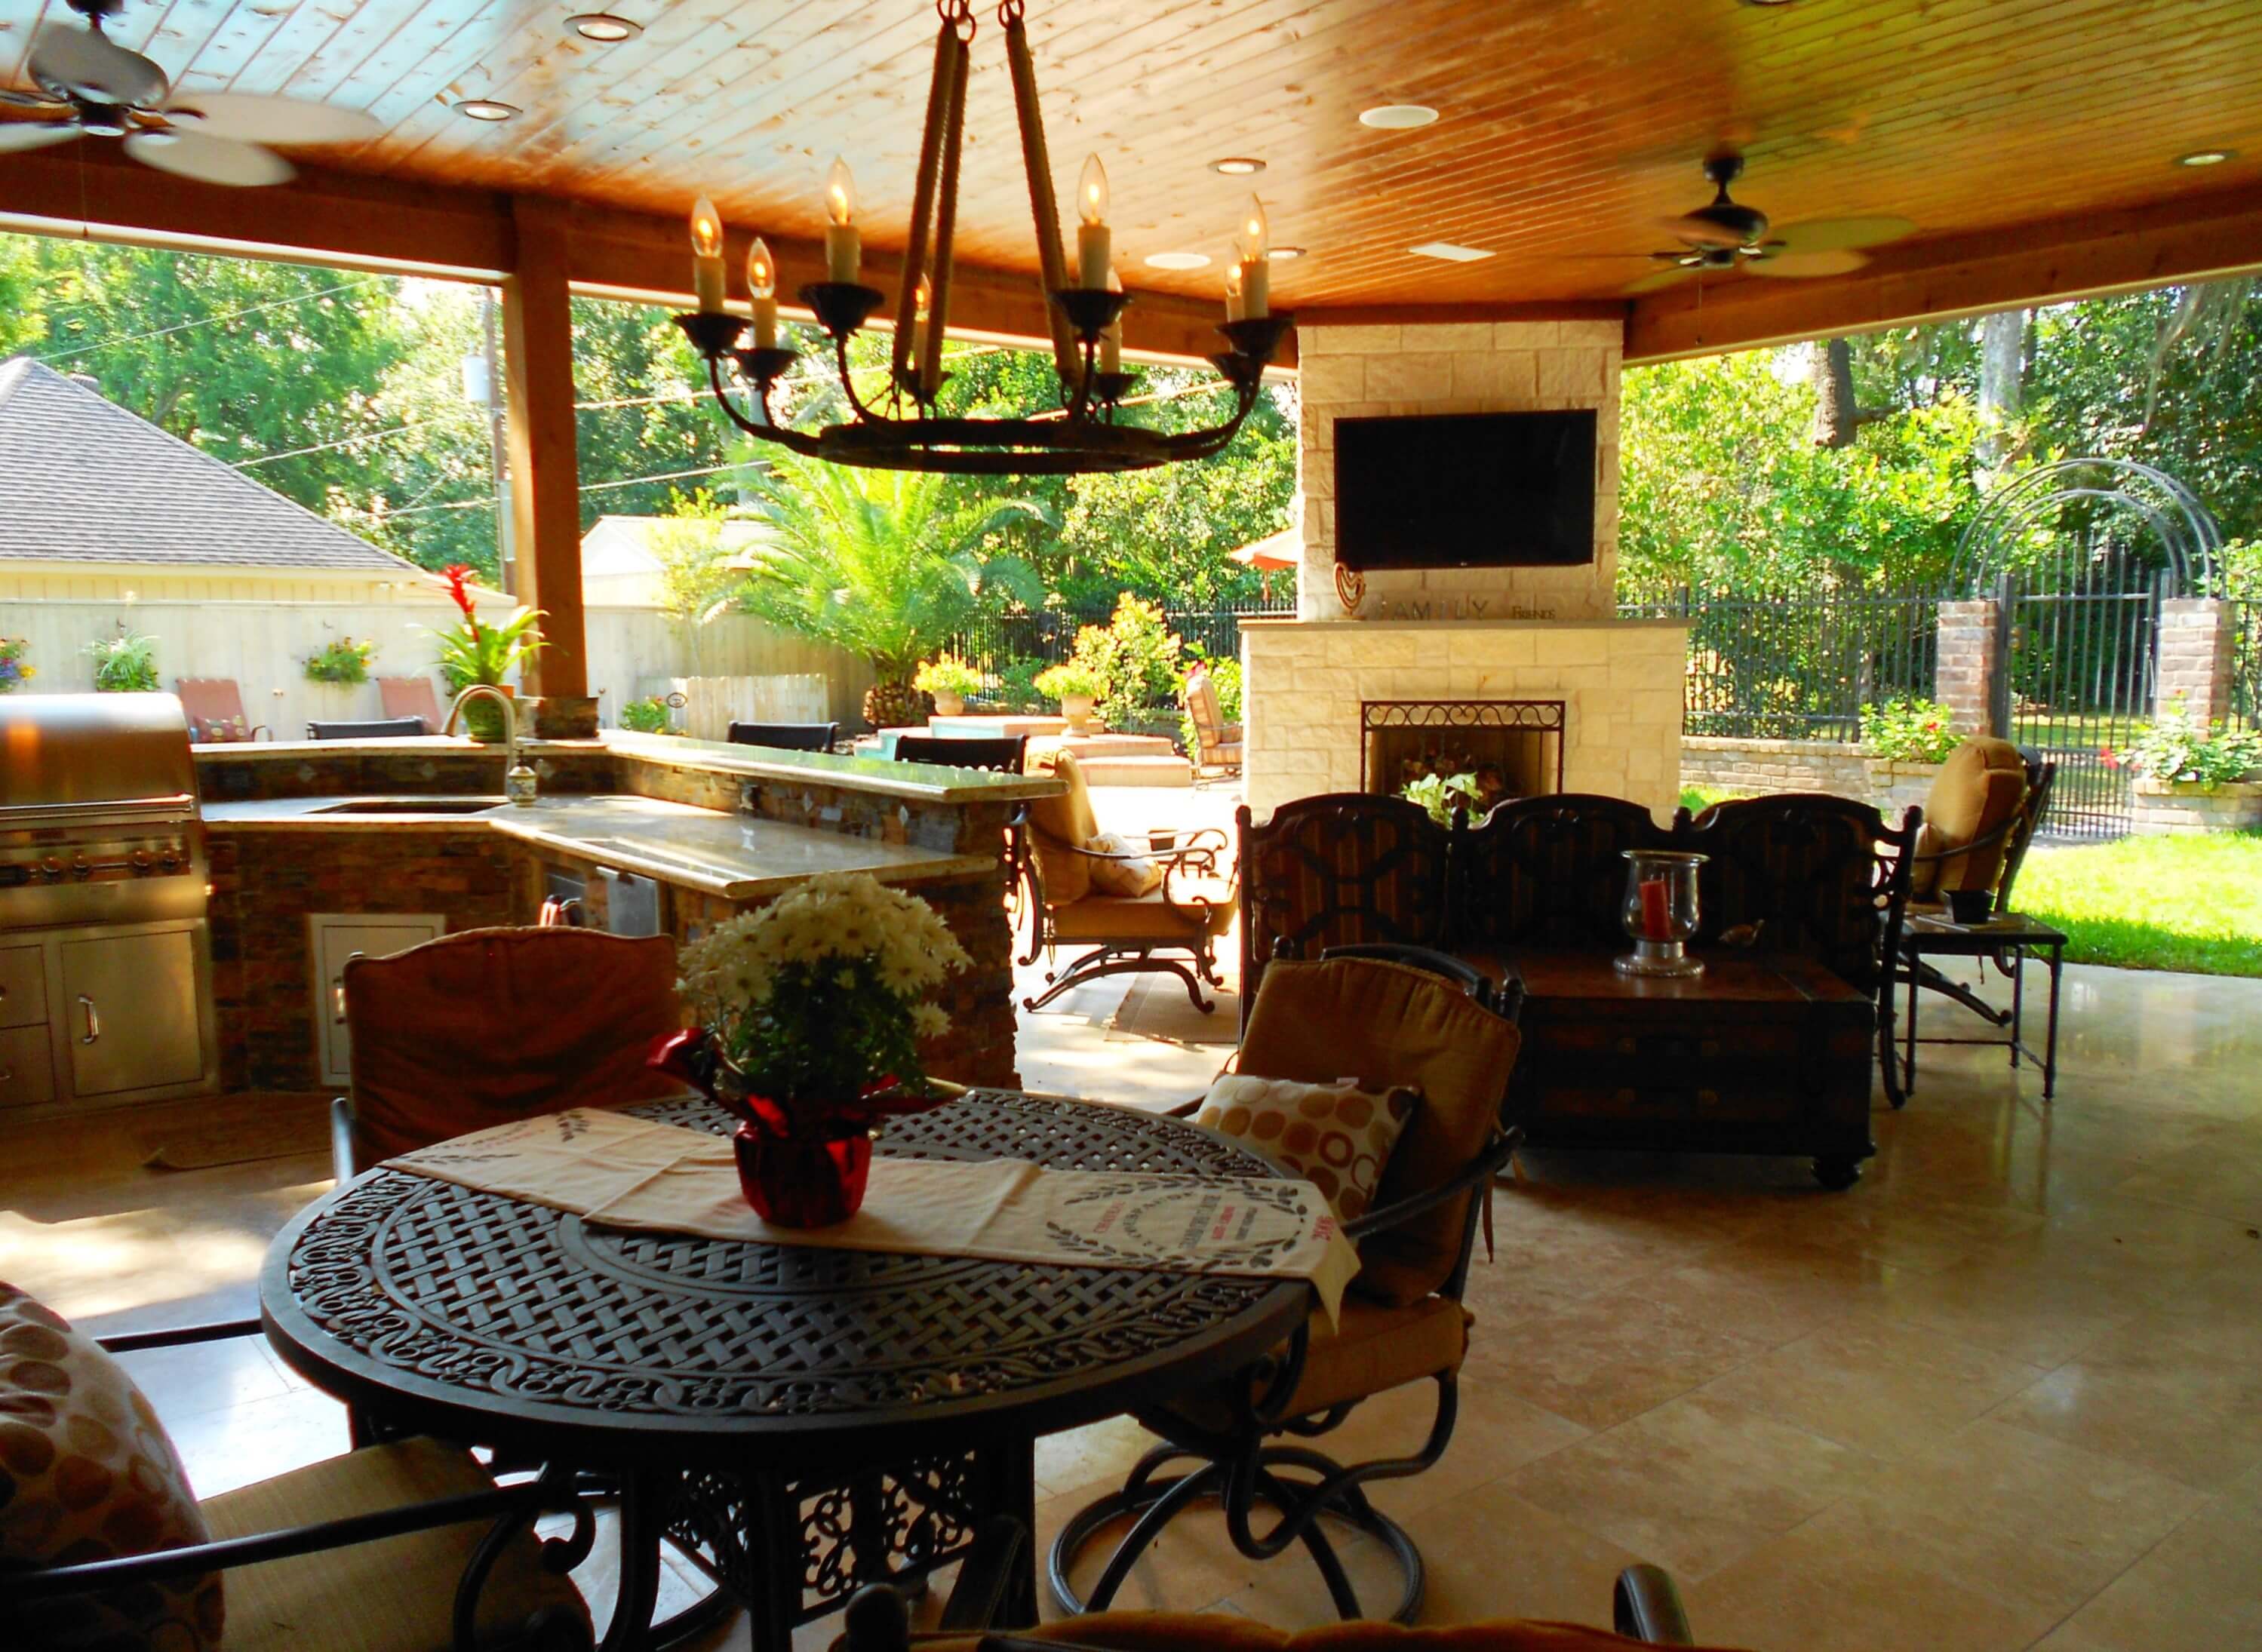 Your Dream Patio How Much Should You, What Is The Cost Of A Covered Patio